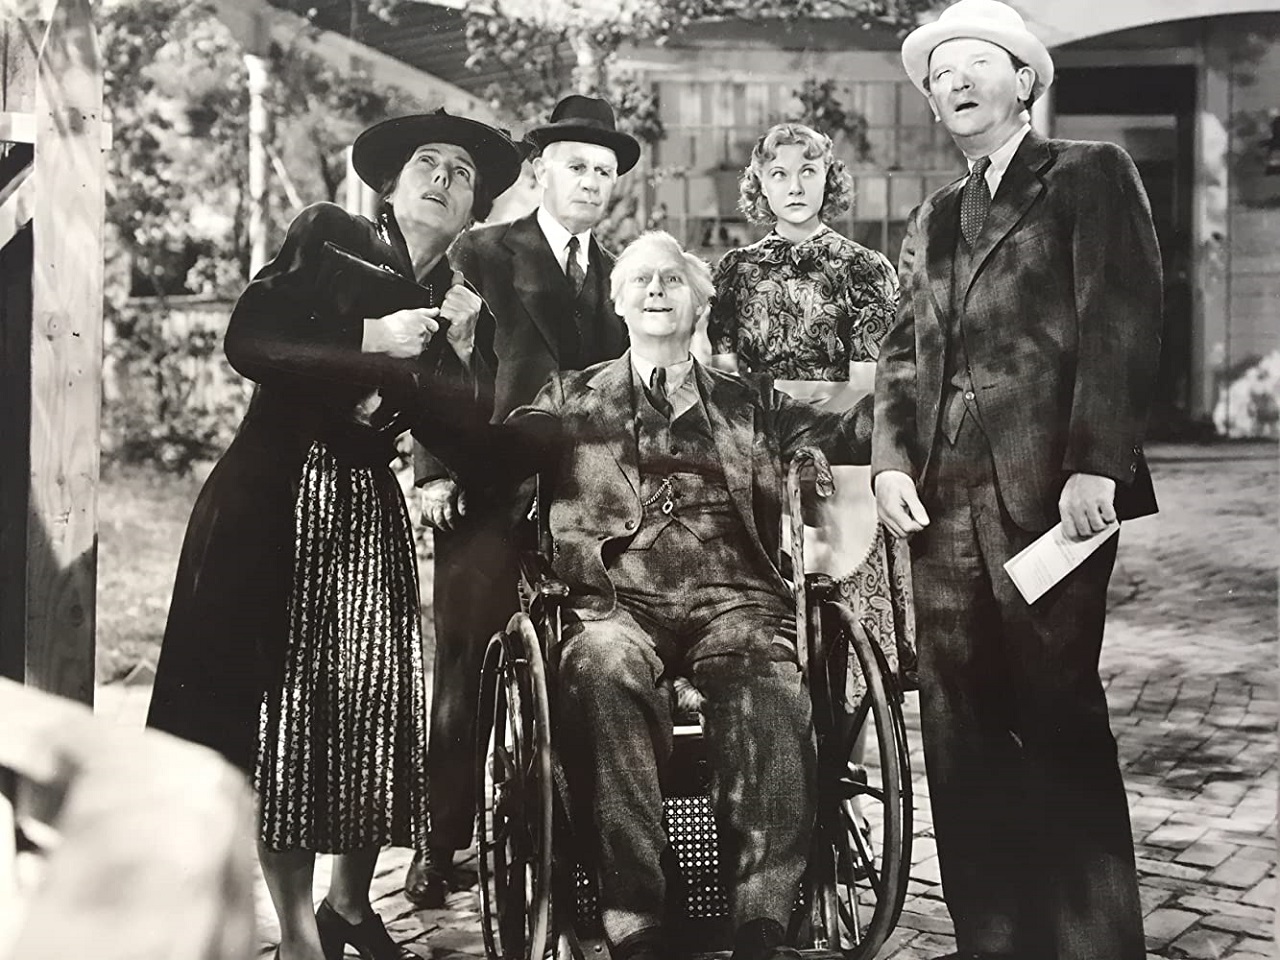 Eily Malyon, Henry Travers, Lionel Barrymore, Una Merkel and Nat Pendleton view the tree in On Borrowed Time (1939)